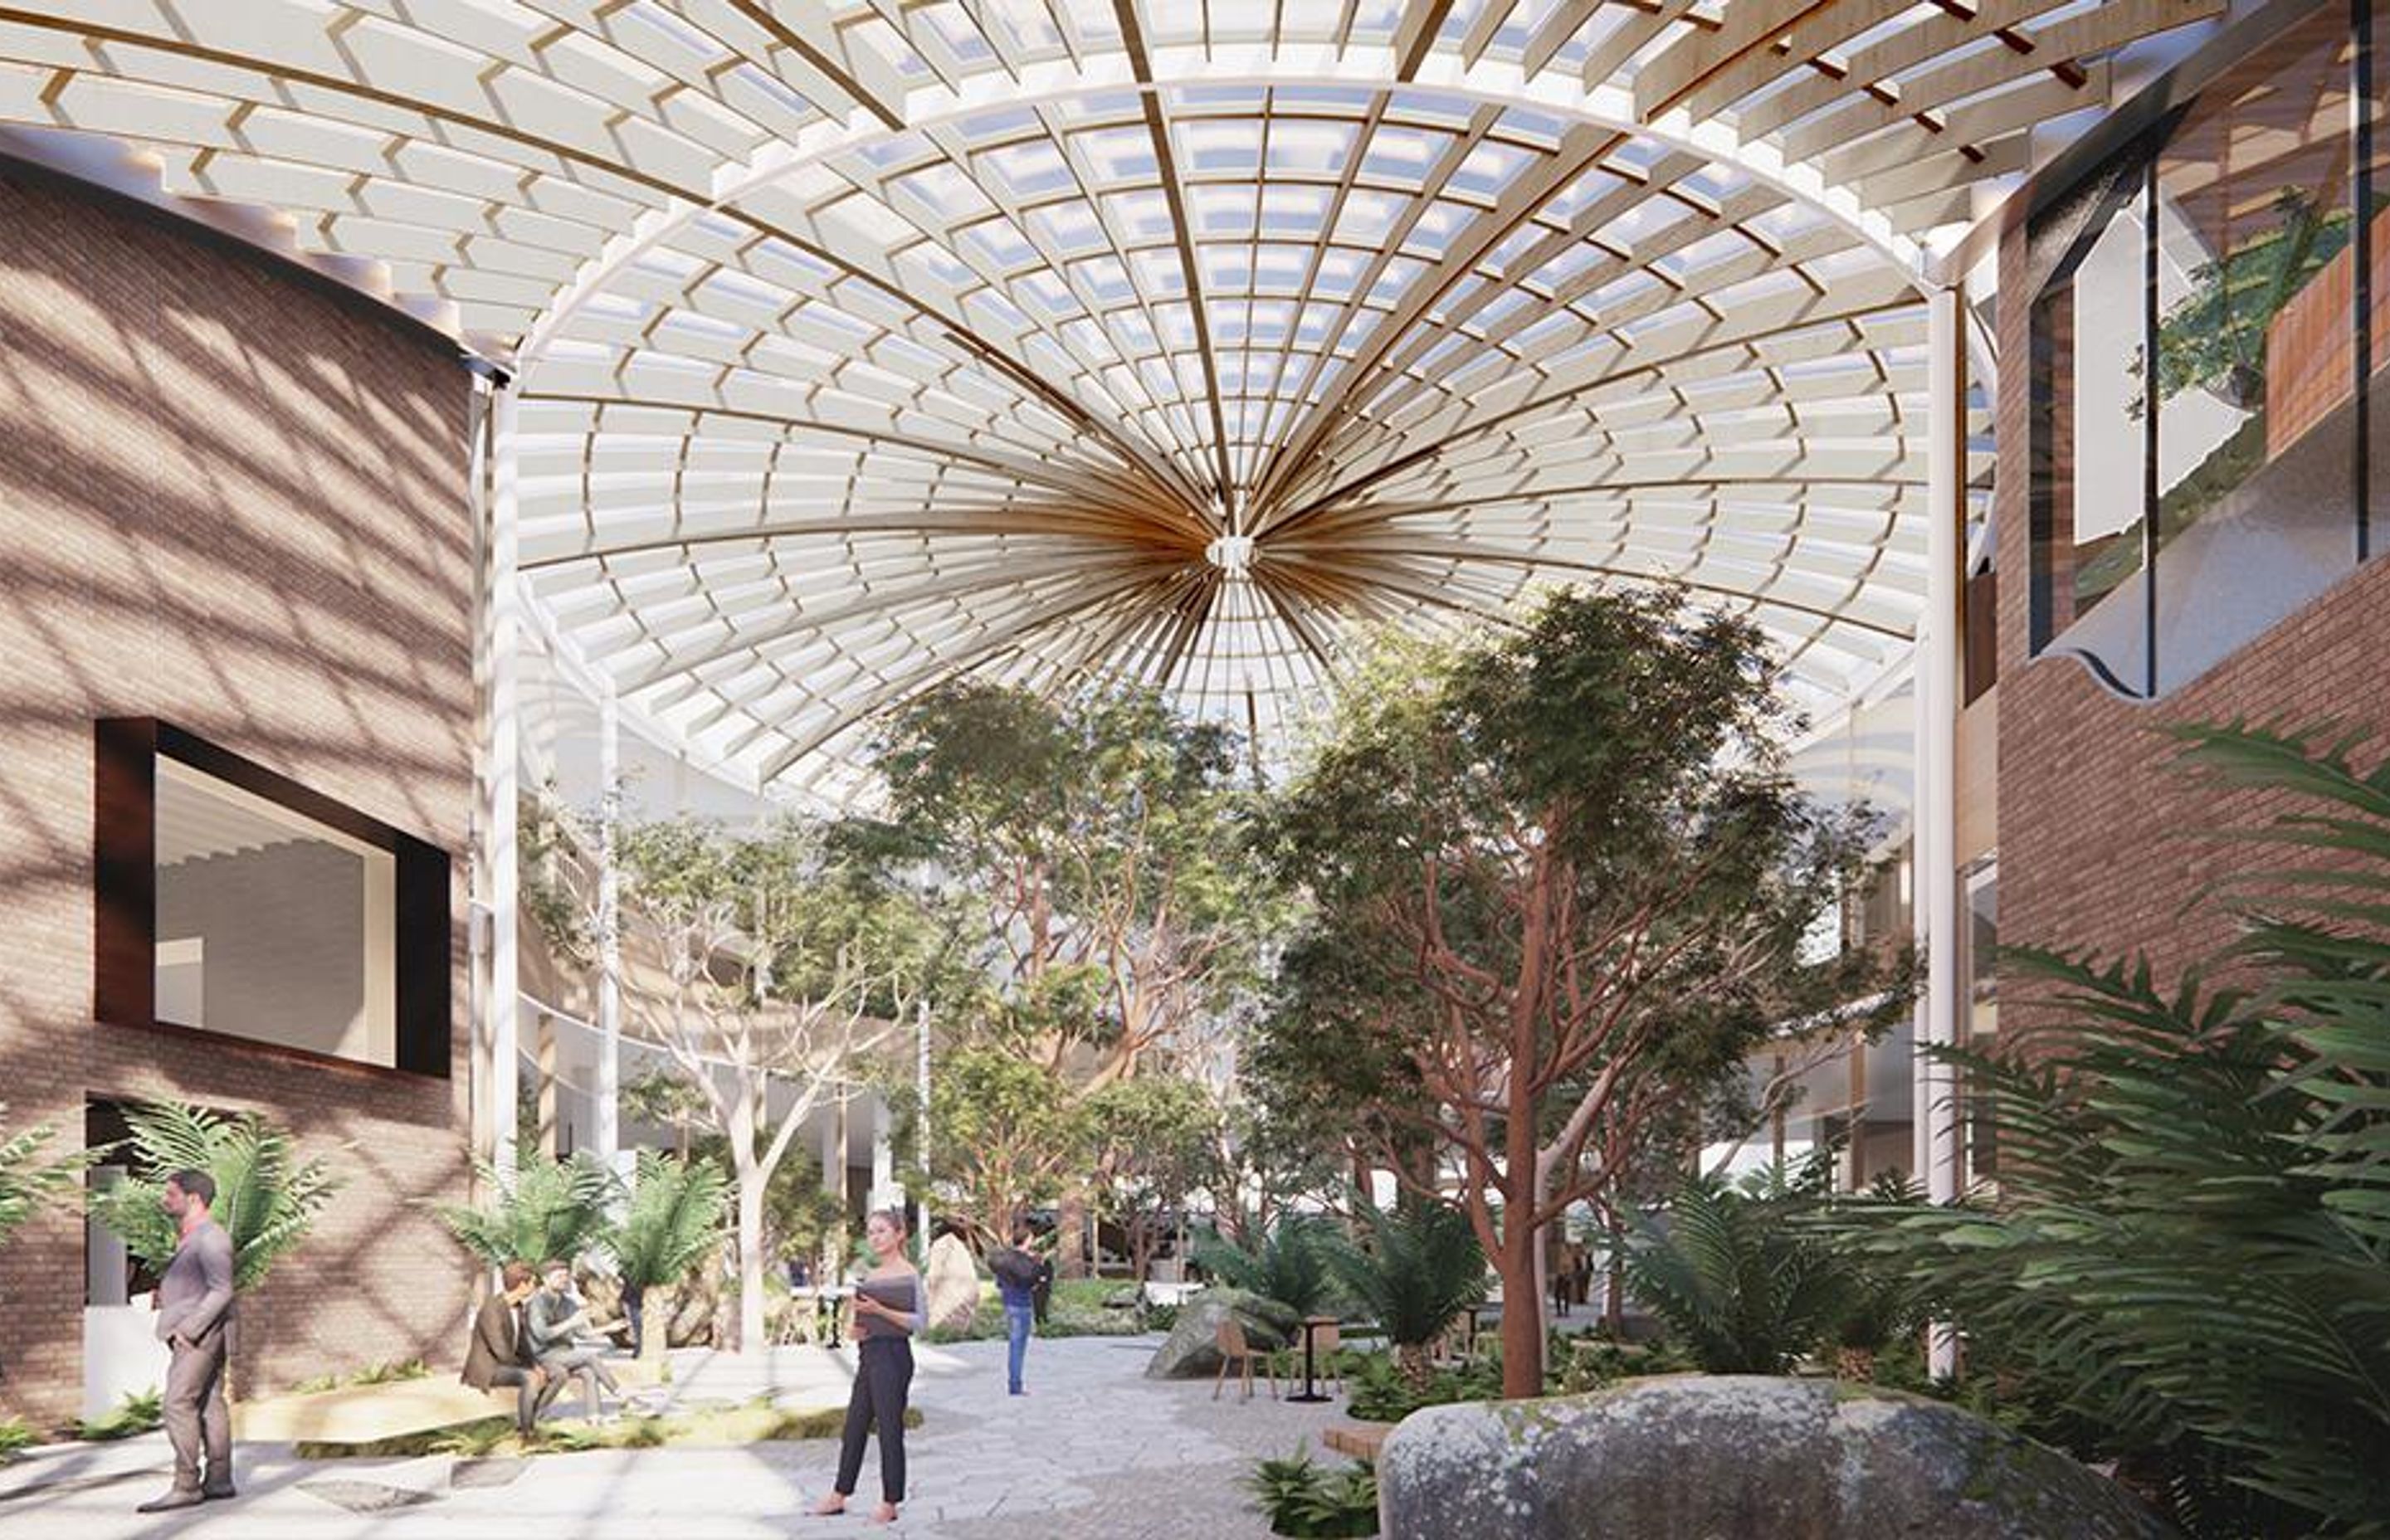 Beautification through biophilia; Woods Bagot set to give Forestry Tasmania building a new lease on life